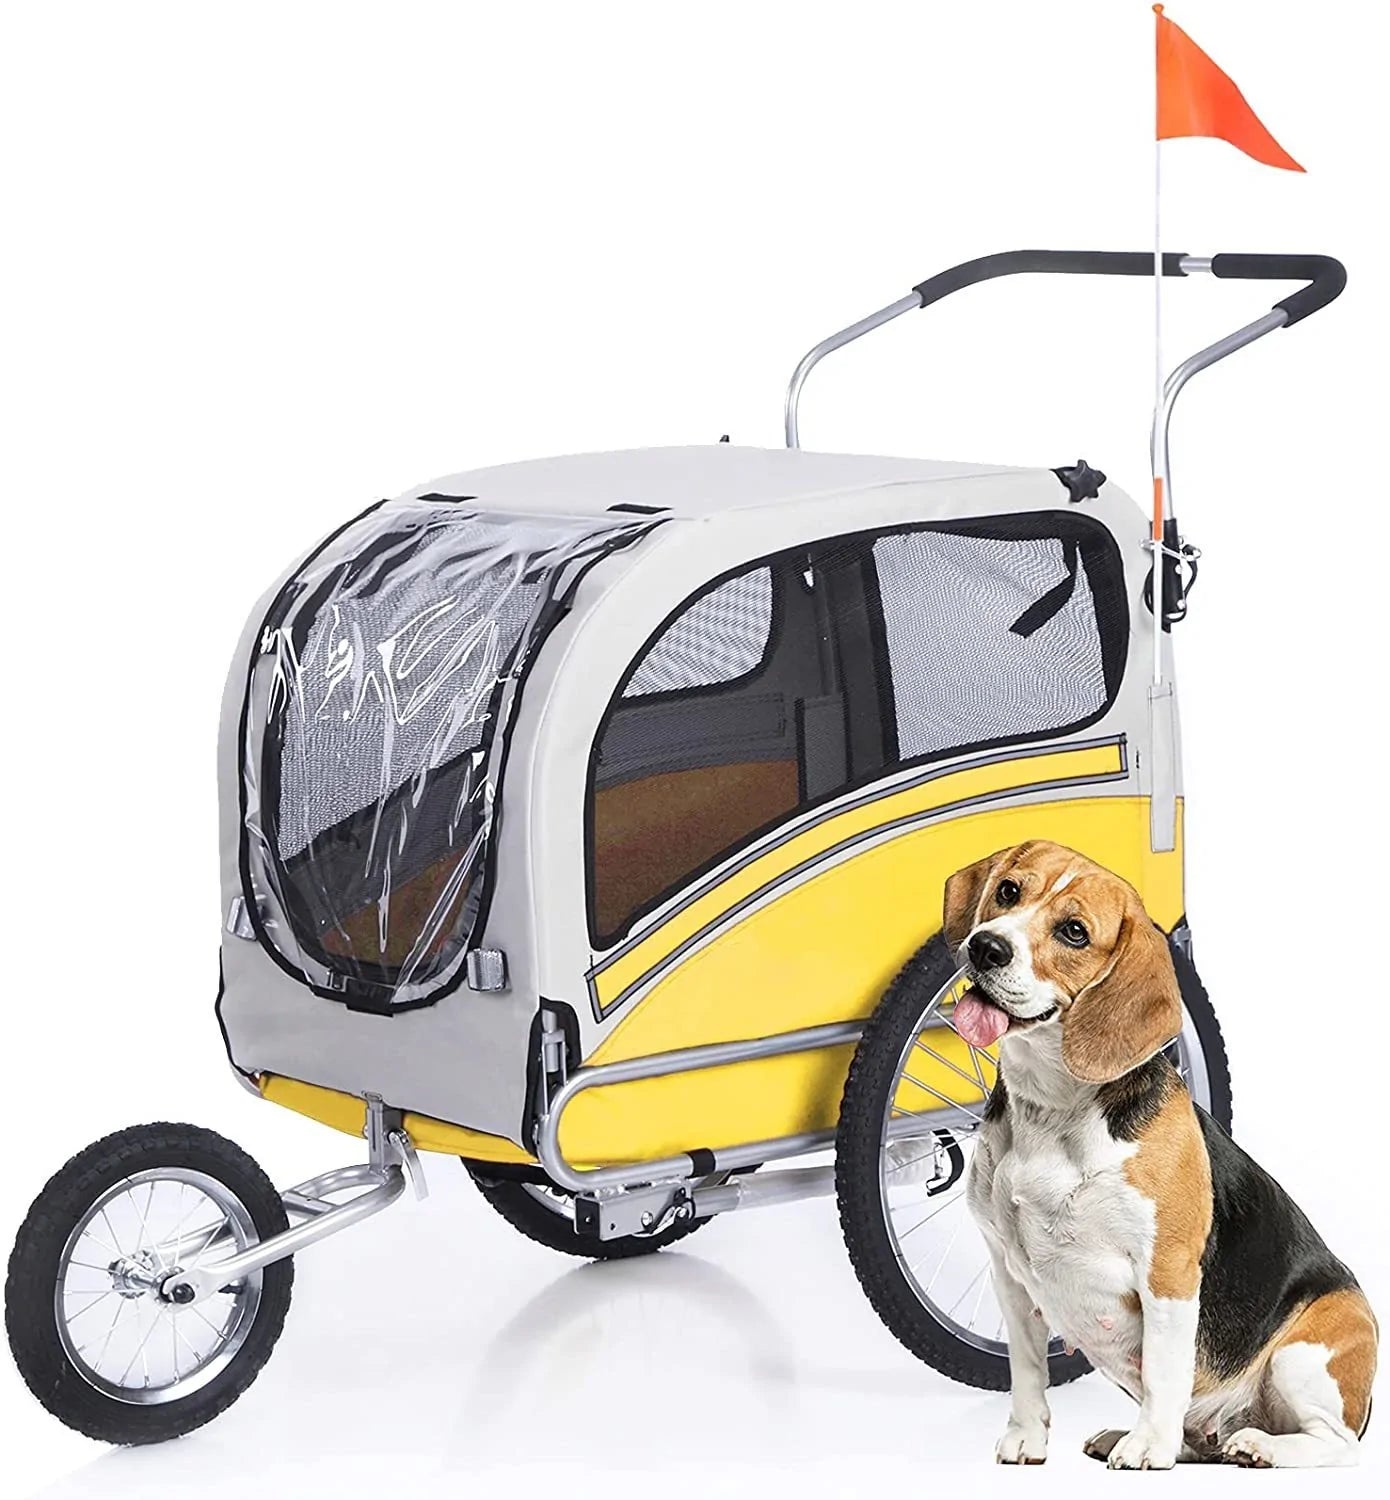 Pet Bicycle Pets R Family 2 in1 for Yellow